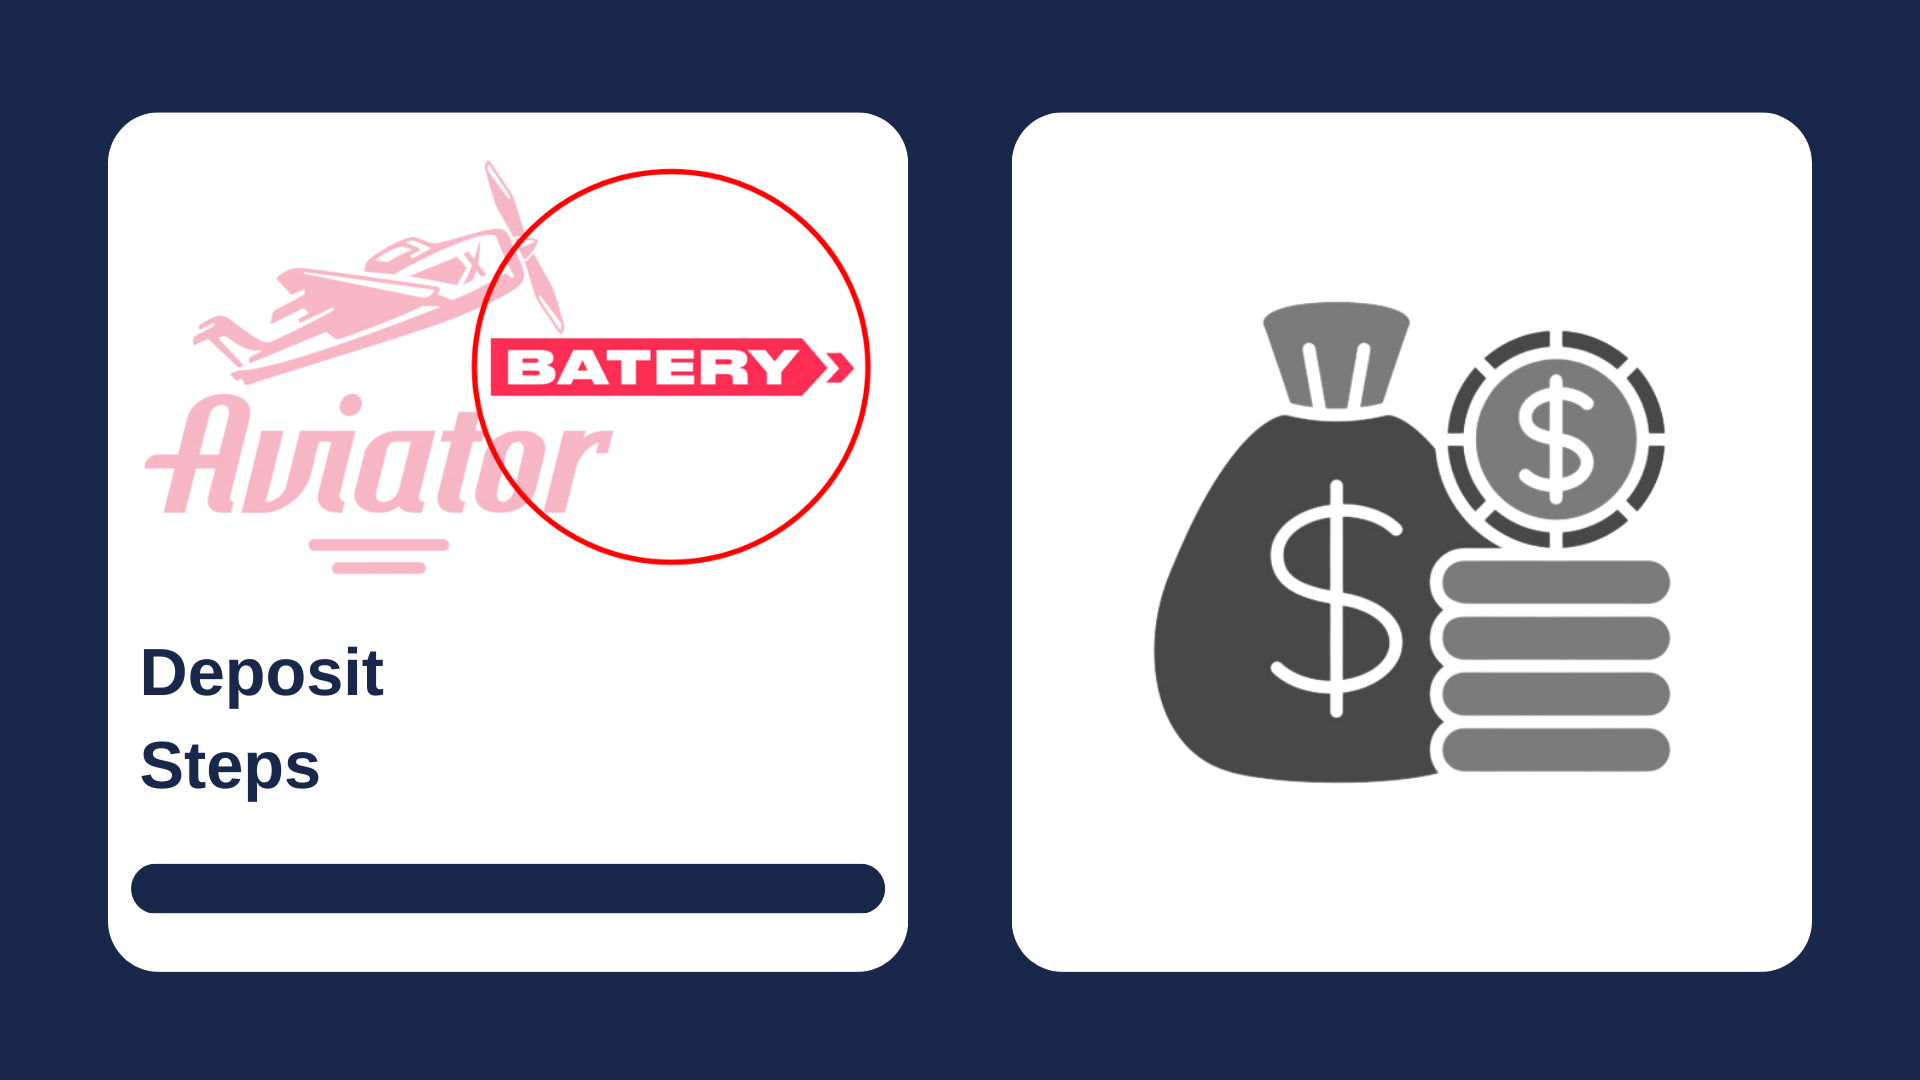 First picture showing Aviator and Batery logos with text, and second - deposit money icon